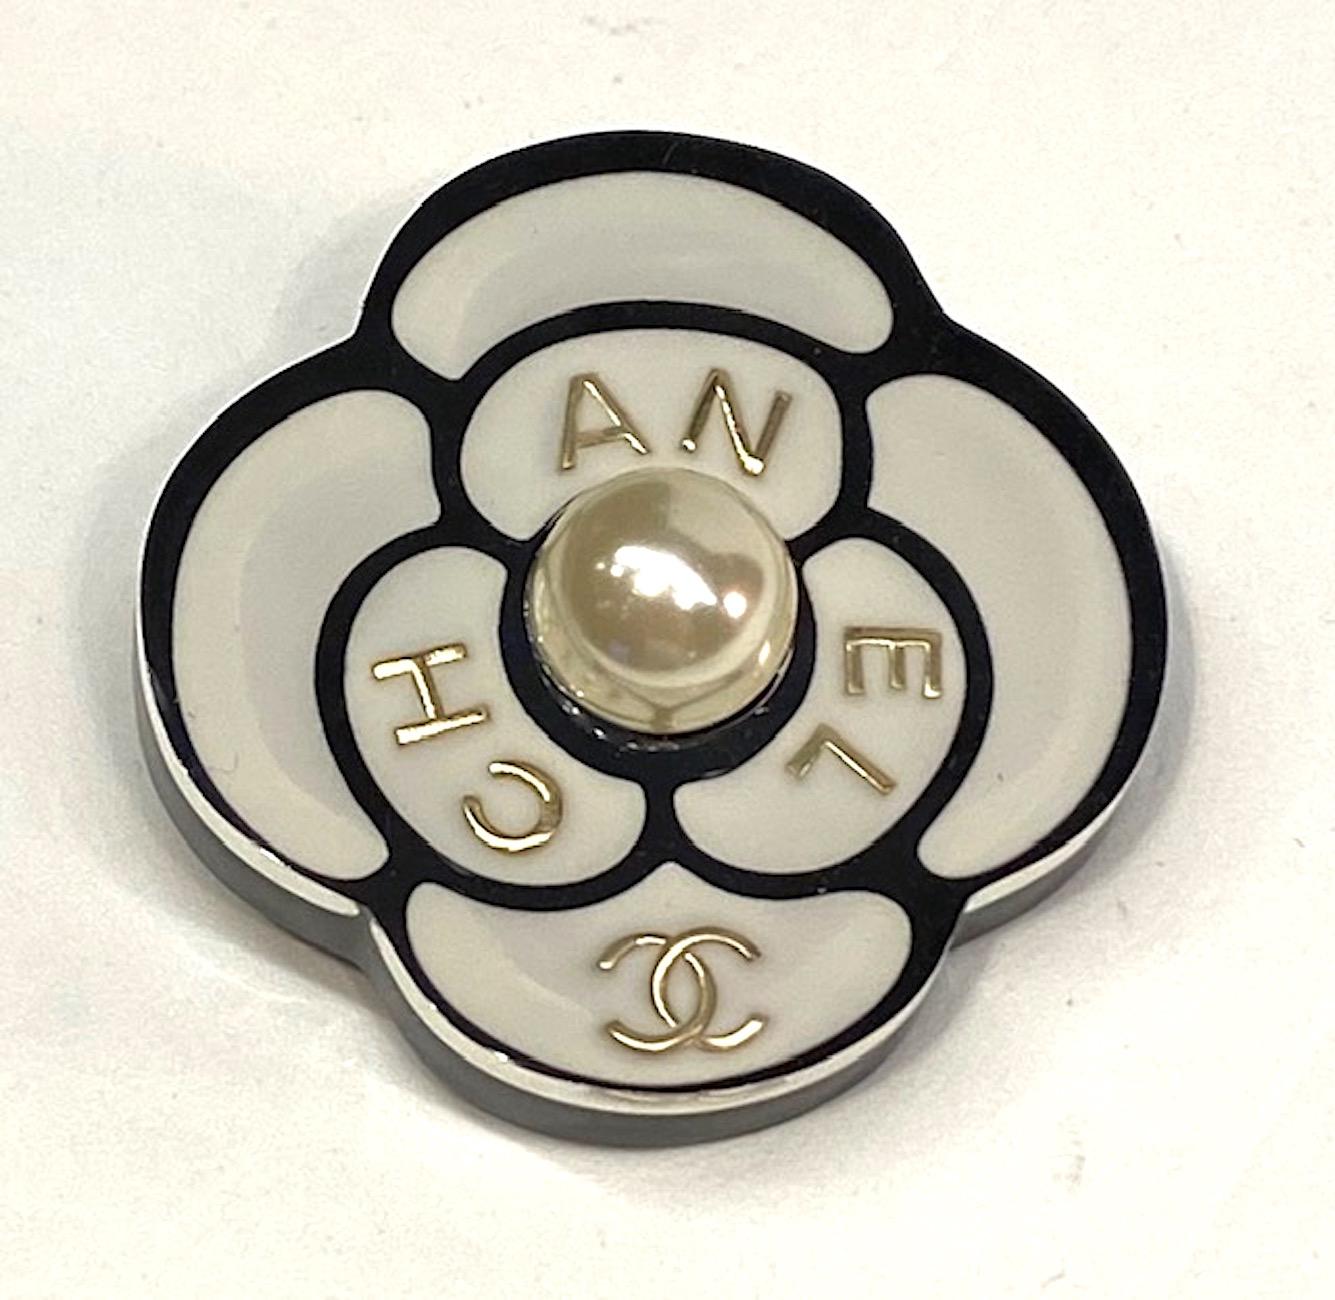 A charming Chanel camelia brooch of layered lucite with pearl. The brooch is .38 of an inch thick with the top half in clear and the bottom half in black lucite resin. Sandwiched between the two layers is the black and white image of the flower with